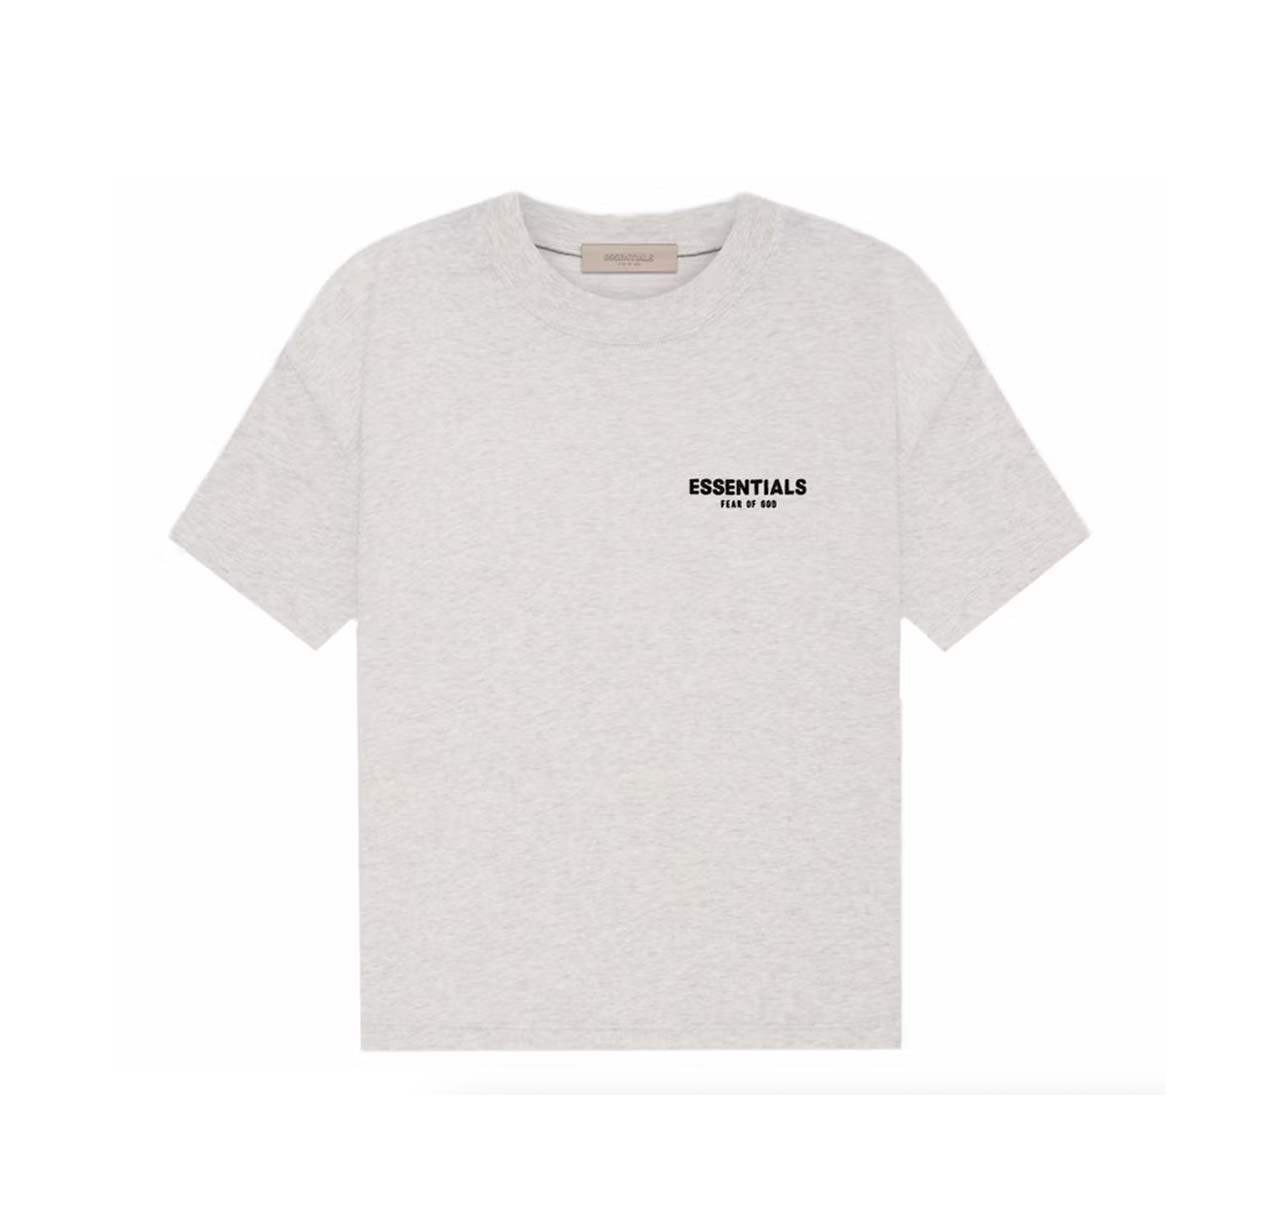 Fear of god essentials SS22 Tee Heather Oat